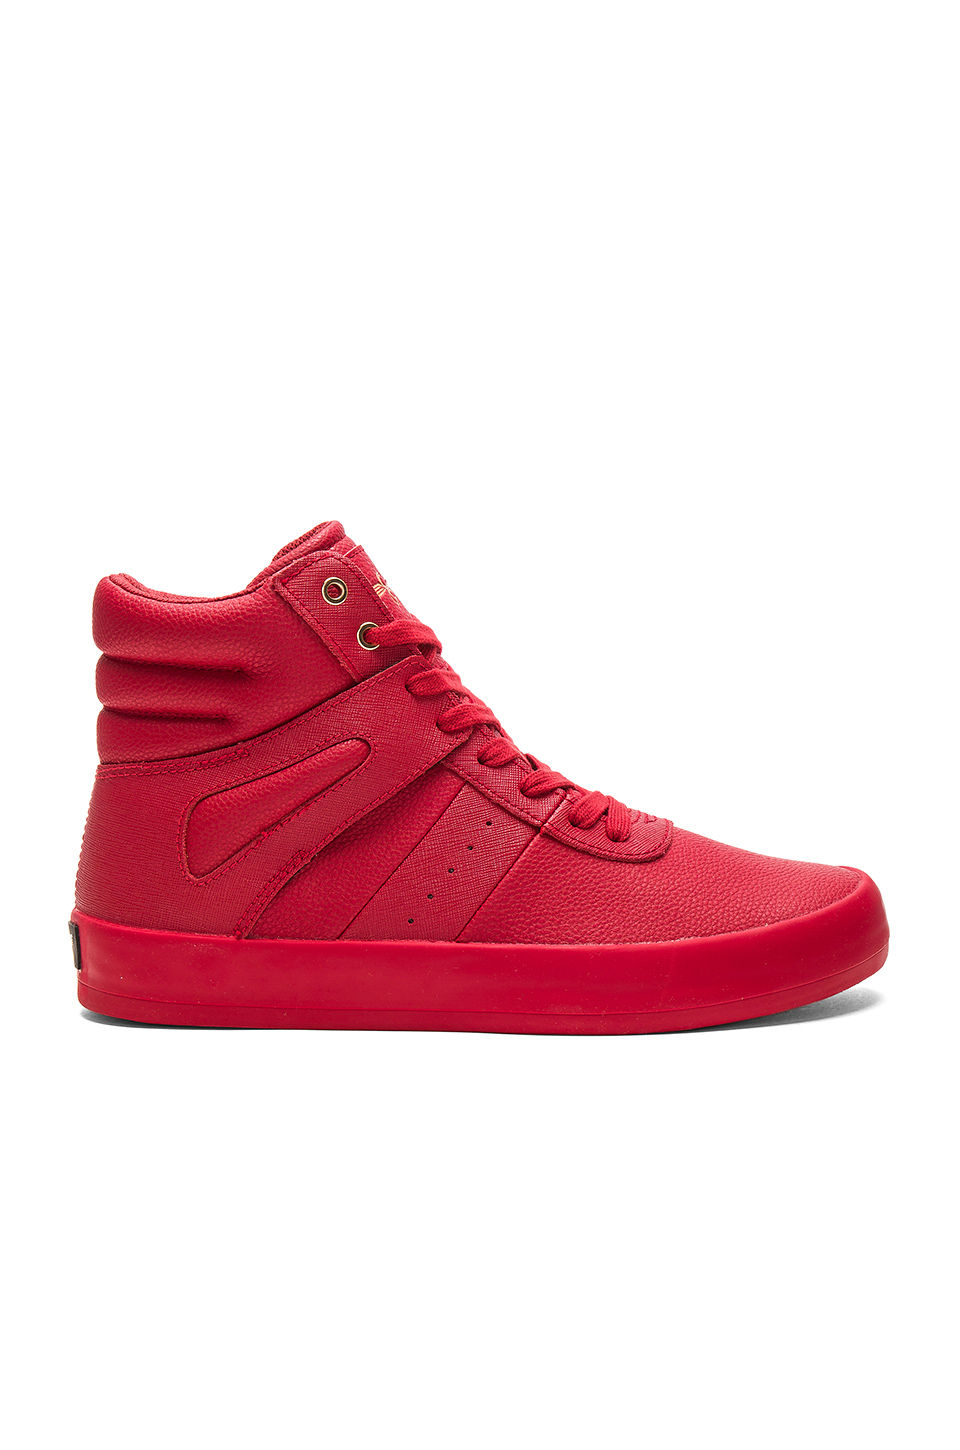 Creative Recreation Moretti High-Top Sneakers in Red for Men - Lyst